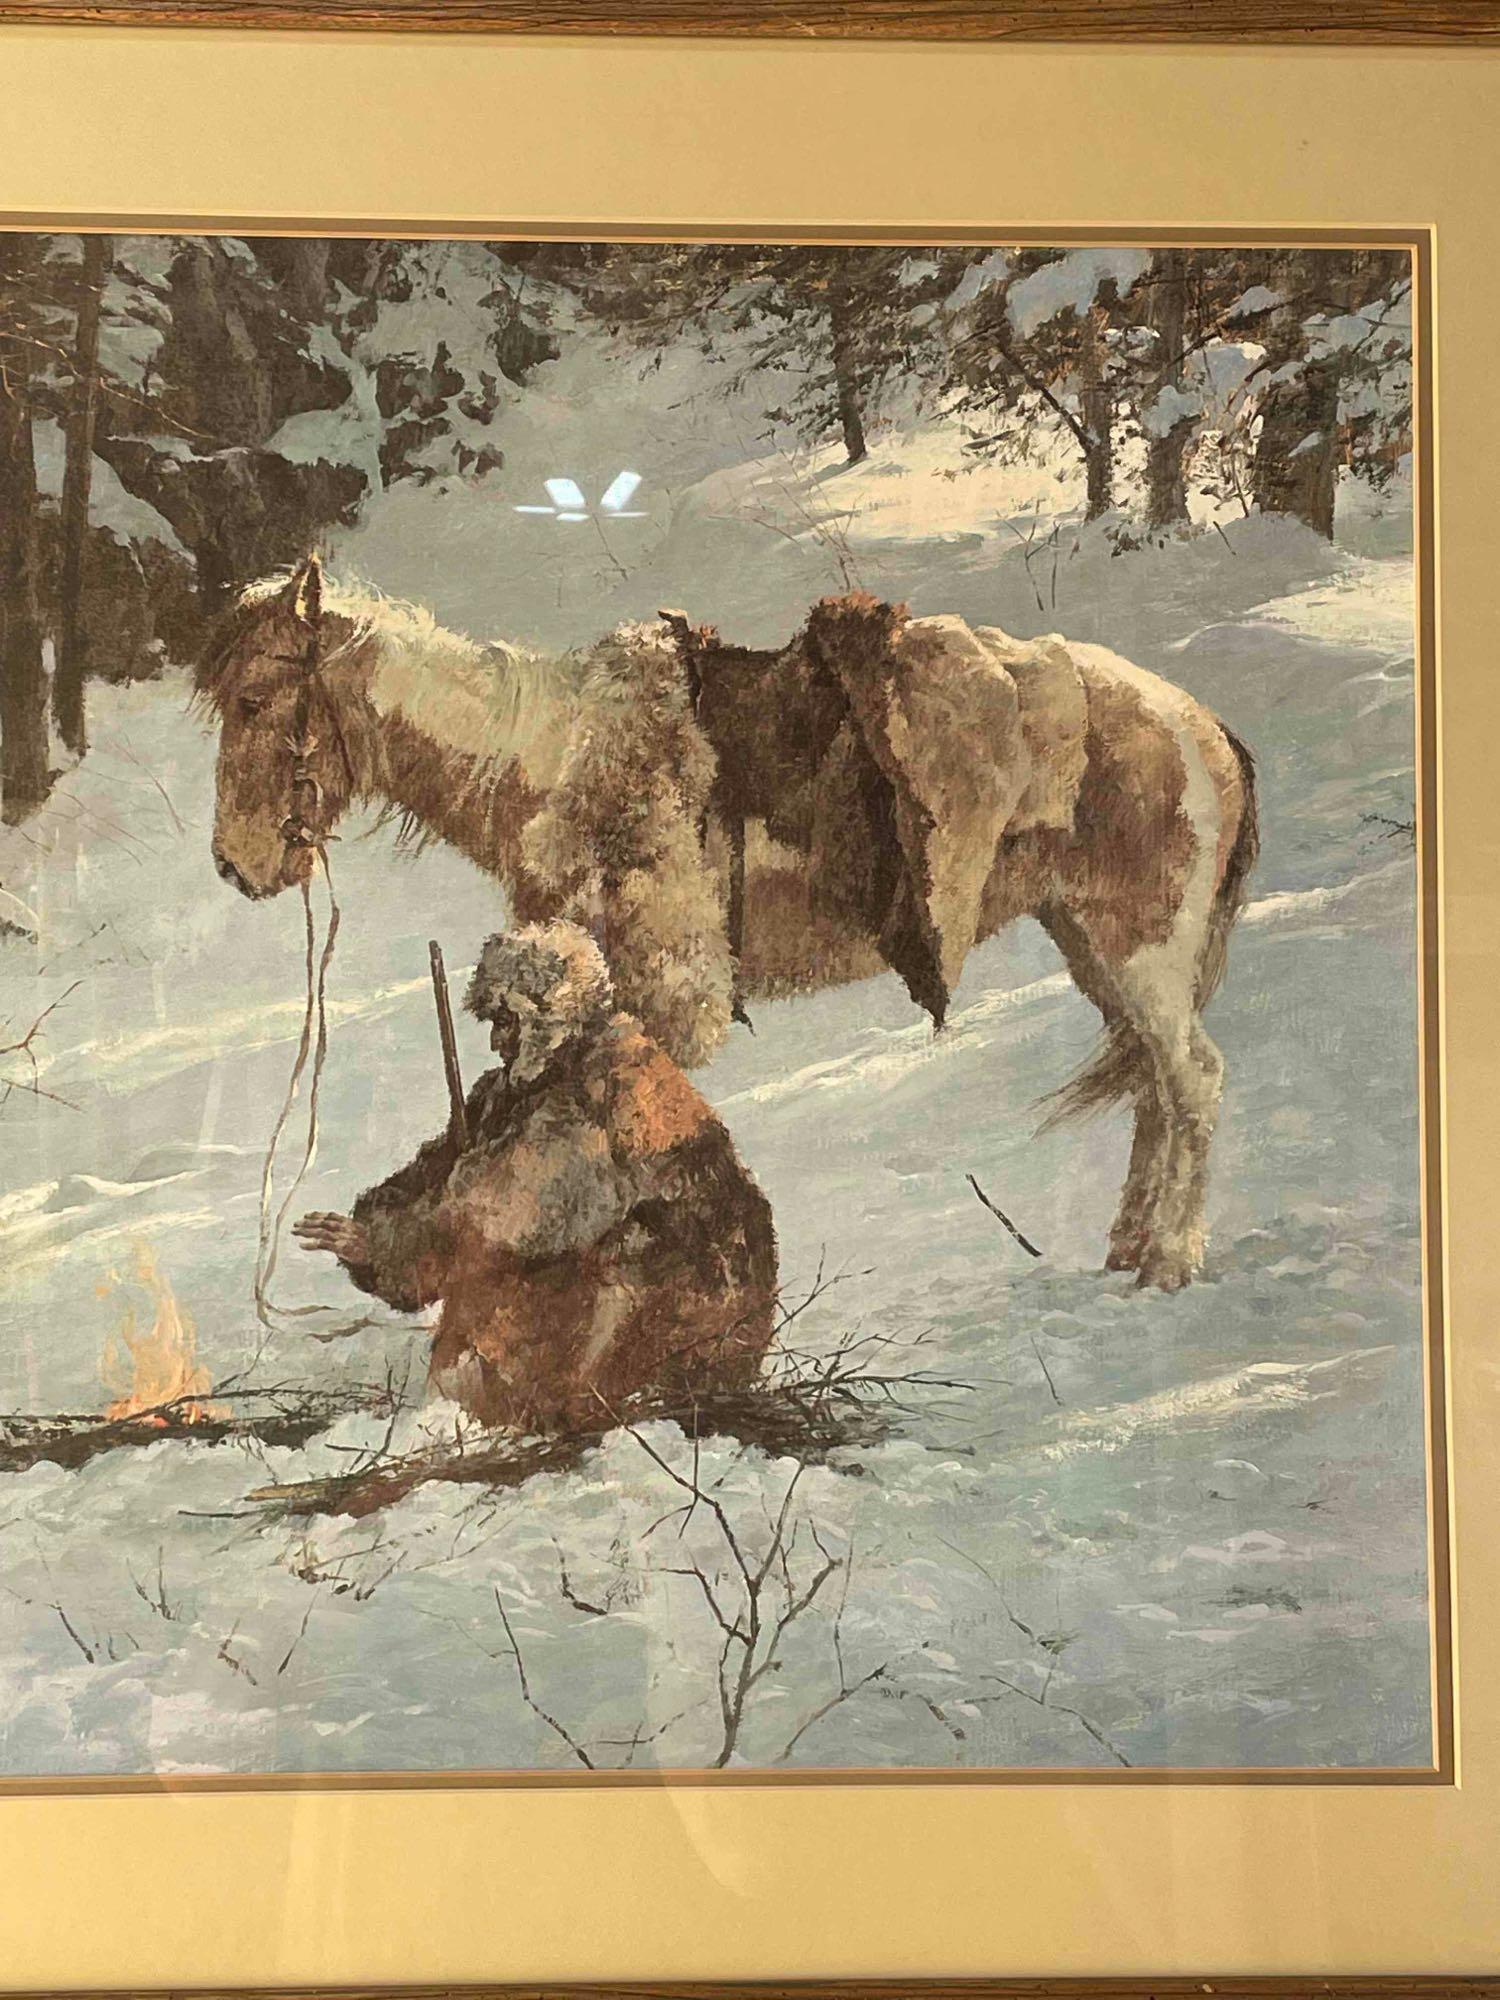 Framed, Signed & Numbered Print "Small Comforts" by Howard Terpning, c. 1977